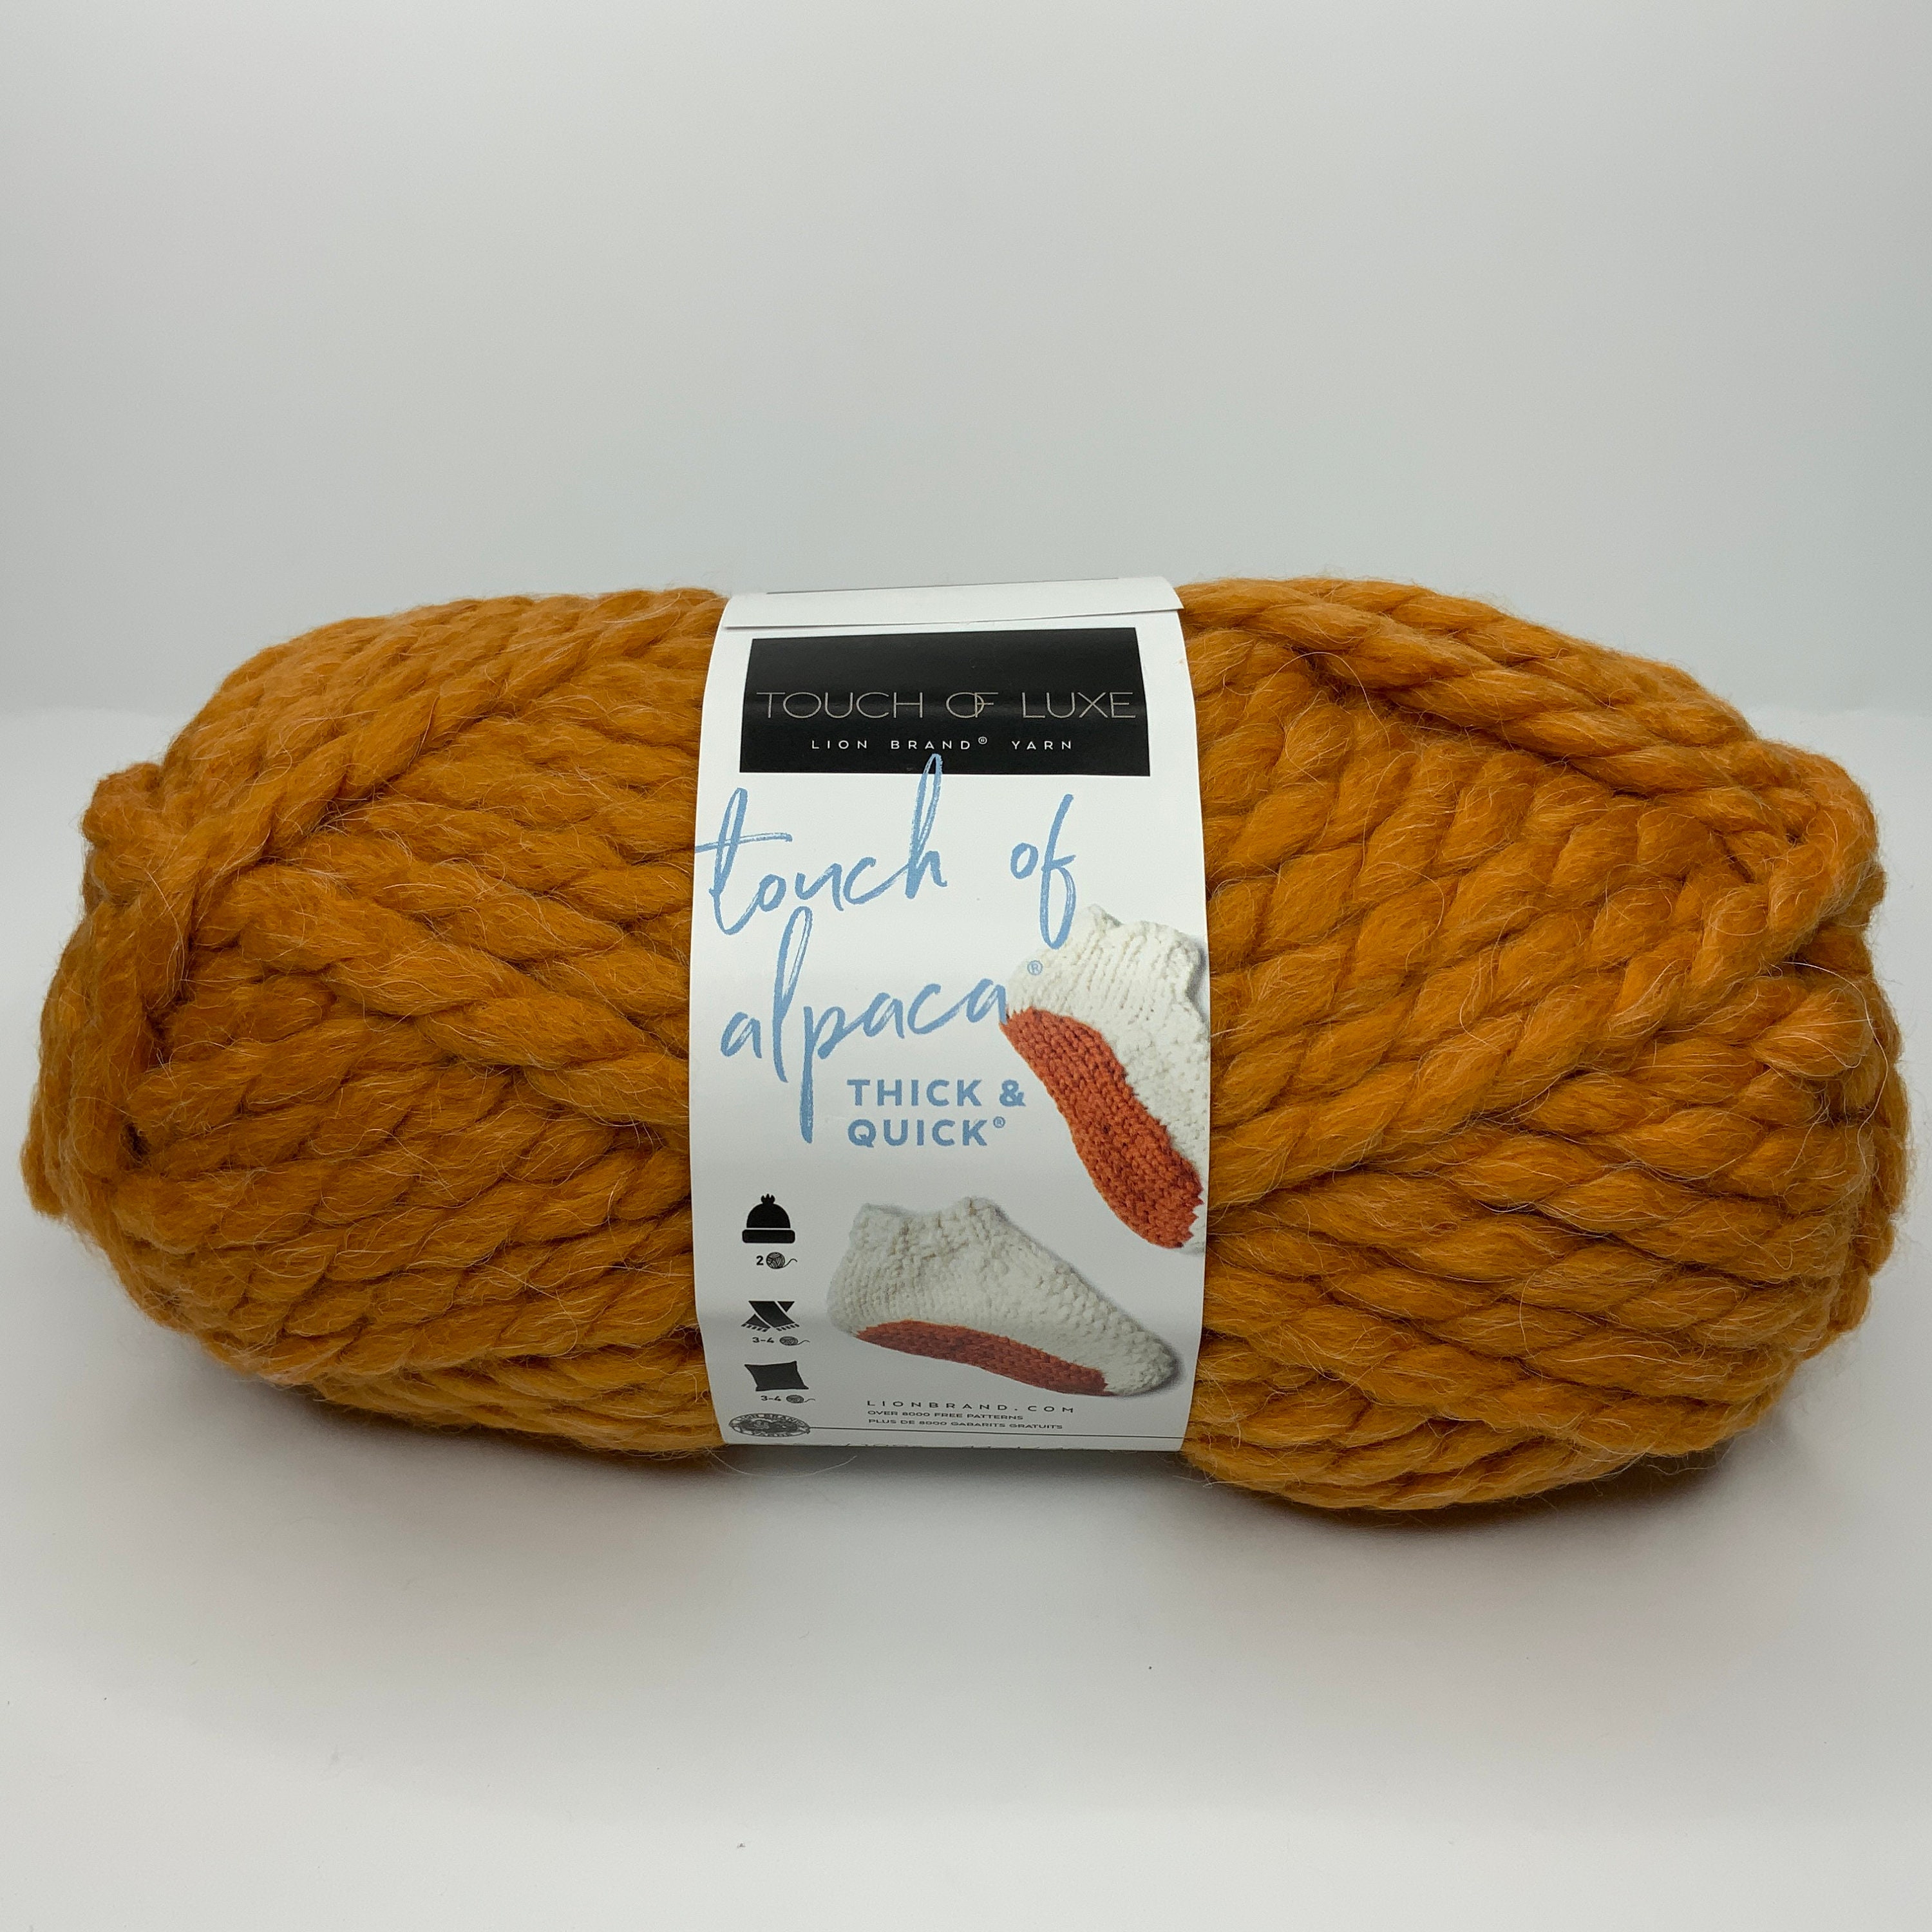  Lion Brand Yarn Touch of Alpaca Thick & Quick Yarn for  Knitting, Crocheting, and Crafting, 1 Pack, Ebony